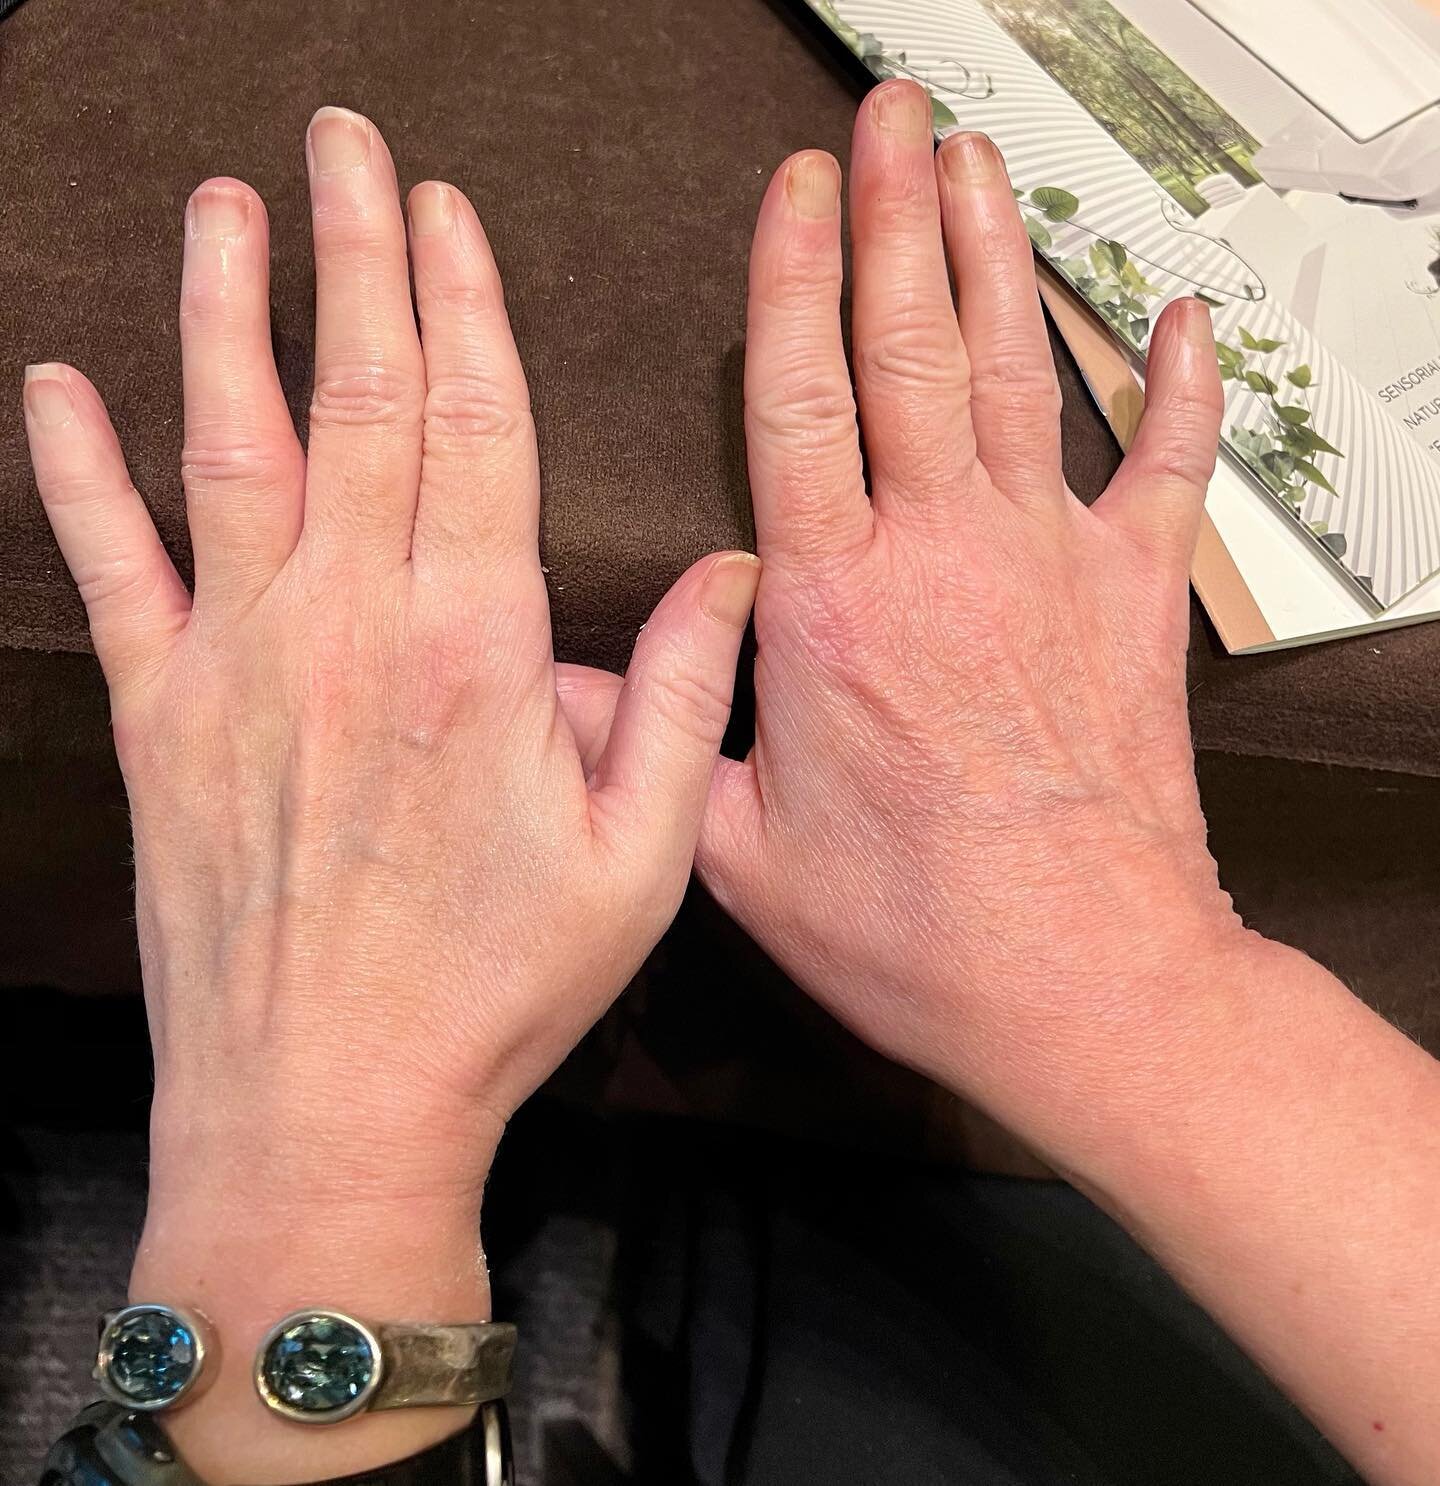 @sothysparis @sothysusa new Illuminating Facial for face, neck, d&eacute;collet&eacute; and hands!! Brighten the skin and lighten sun and age spots! These are my hands before and after. #brightening #aesthetician #sothys #nosunspots #antiaging #healt